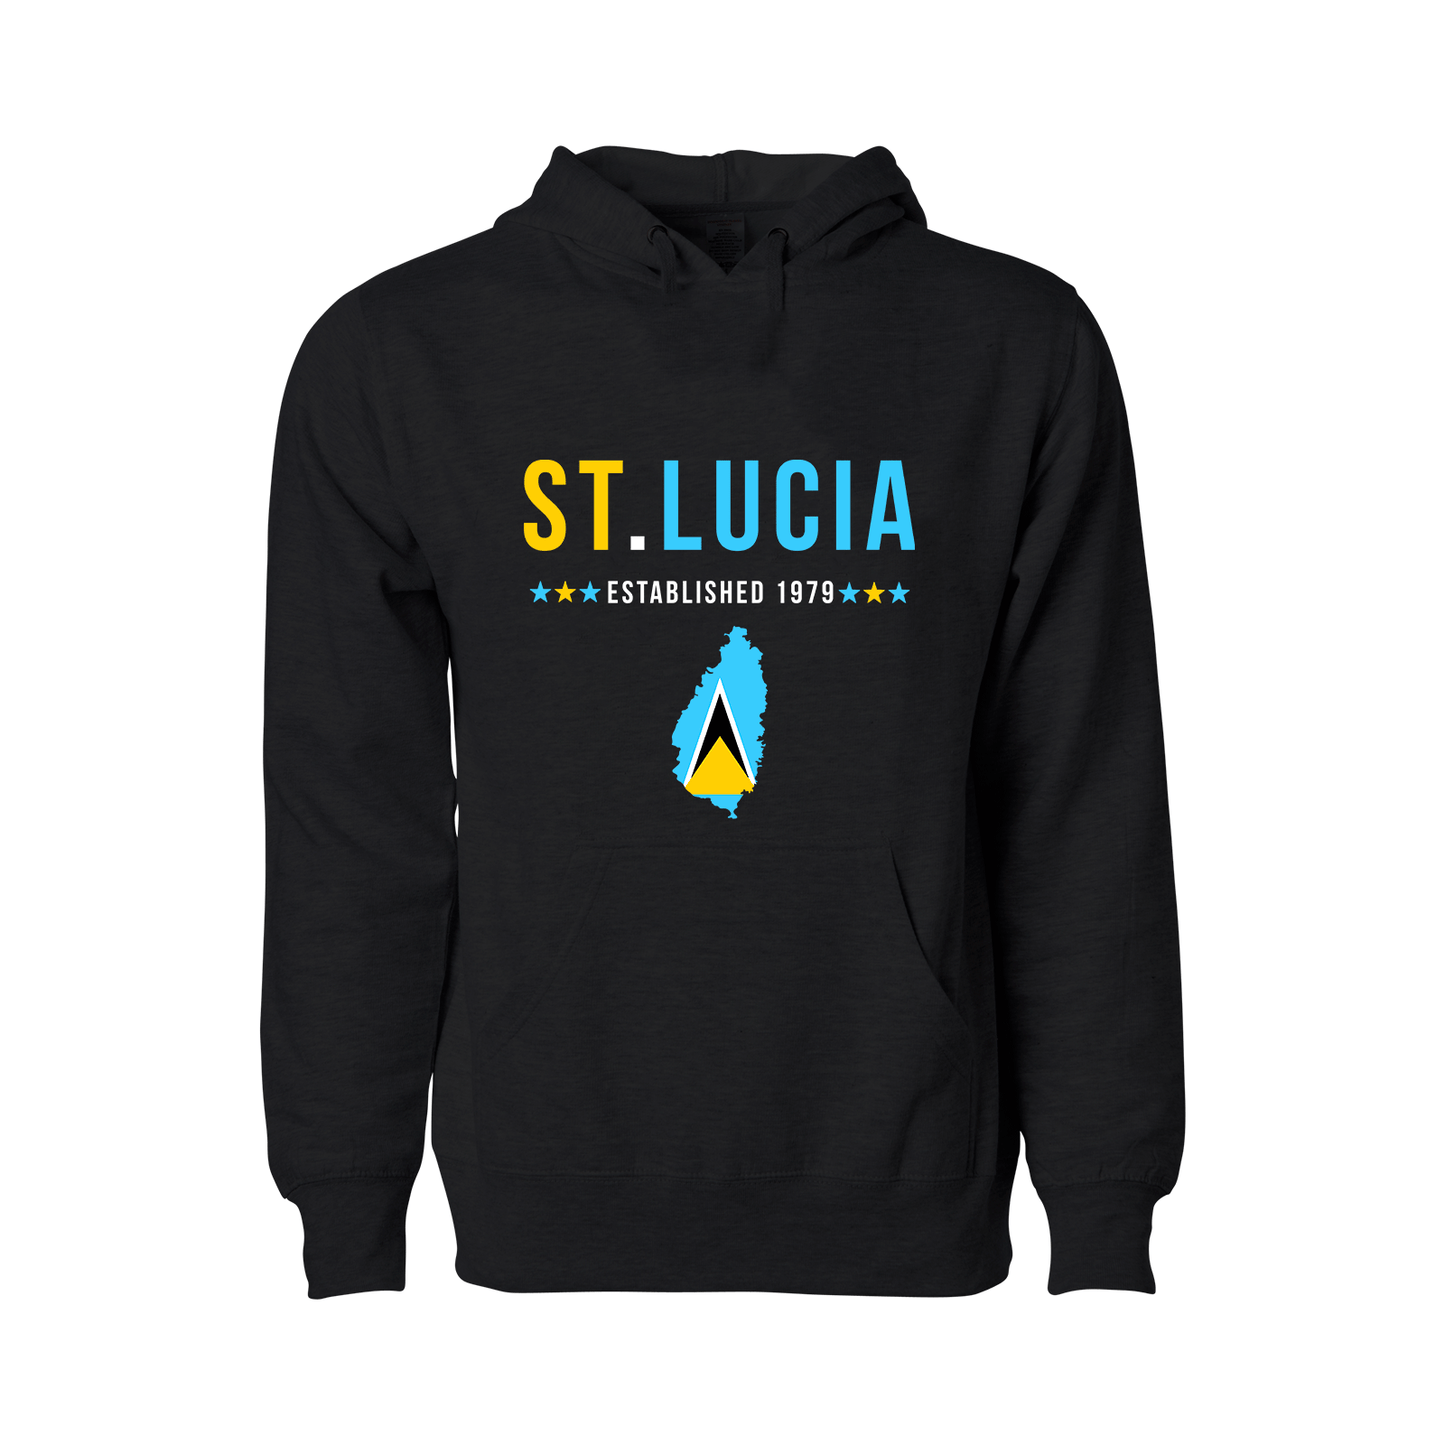 St. Lucia Hoodie - Adult